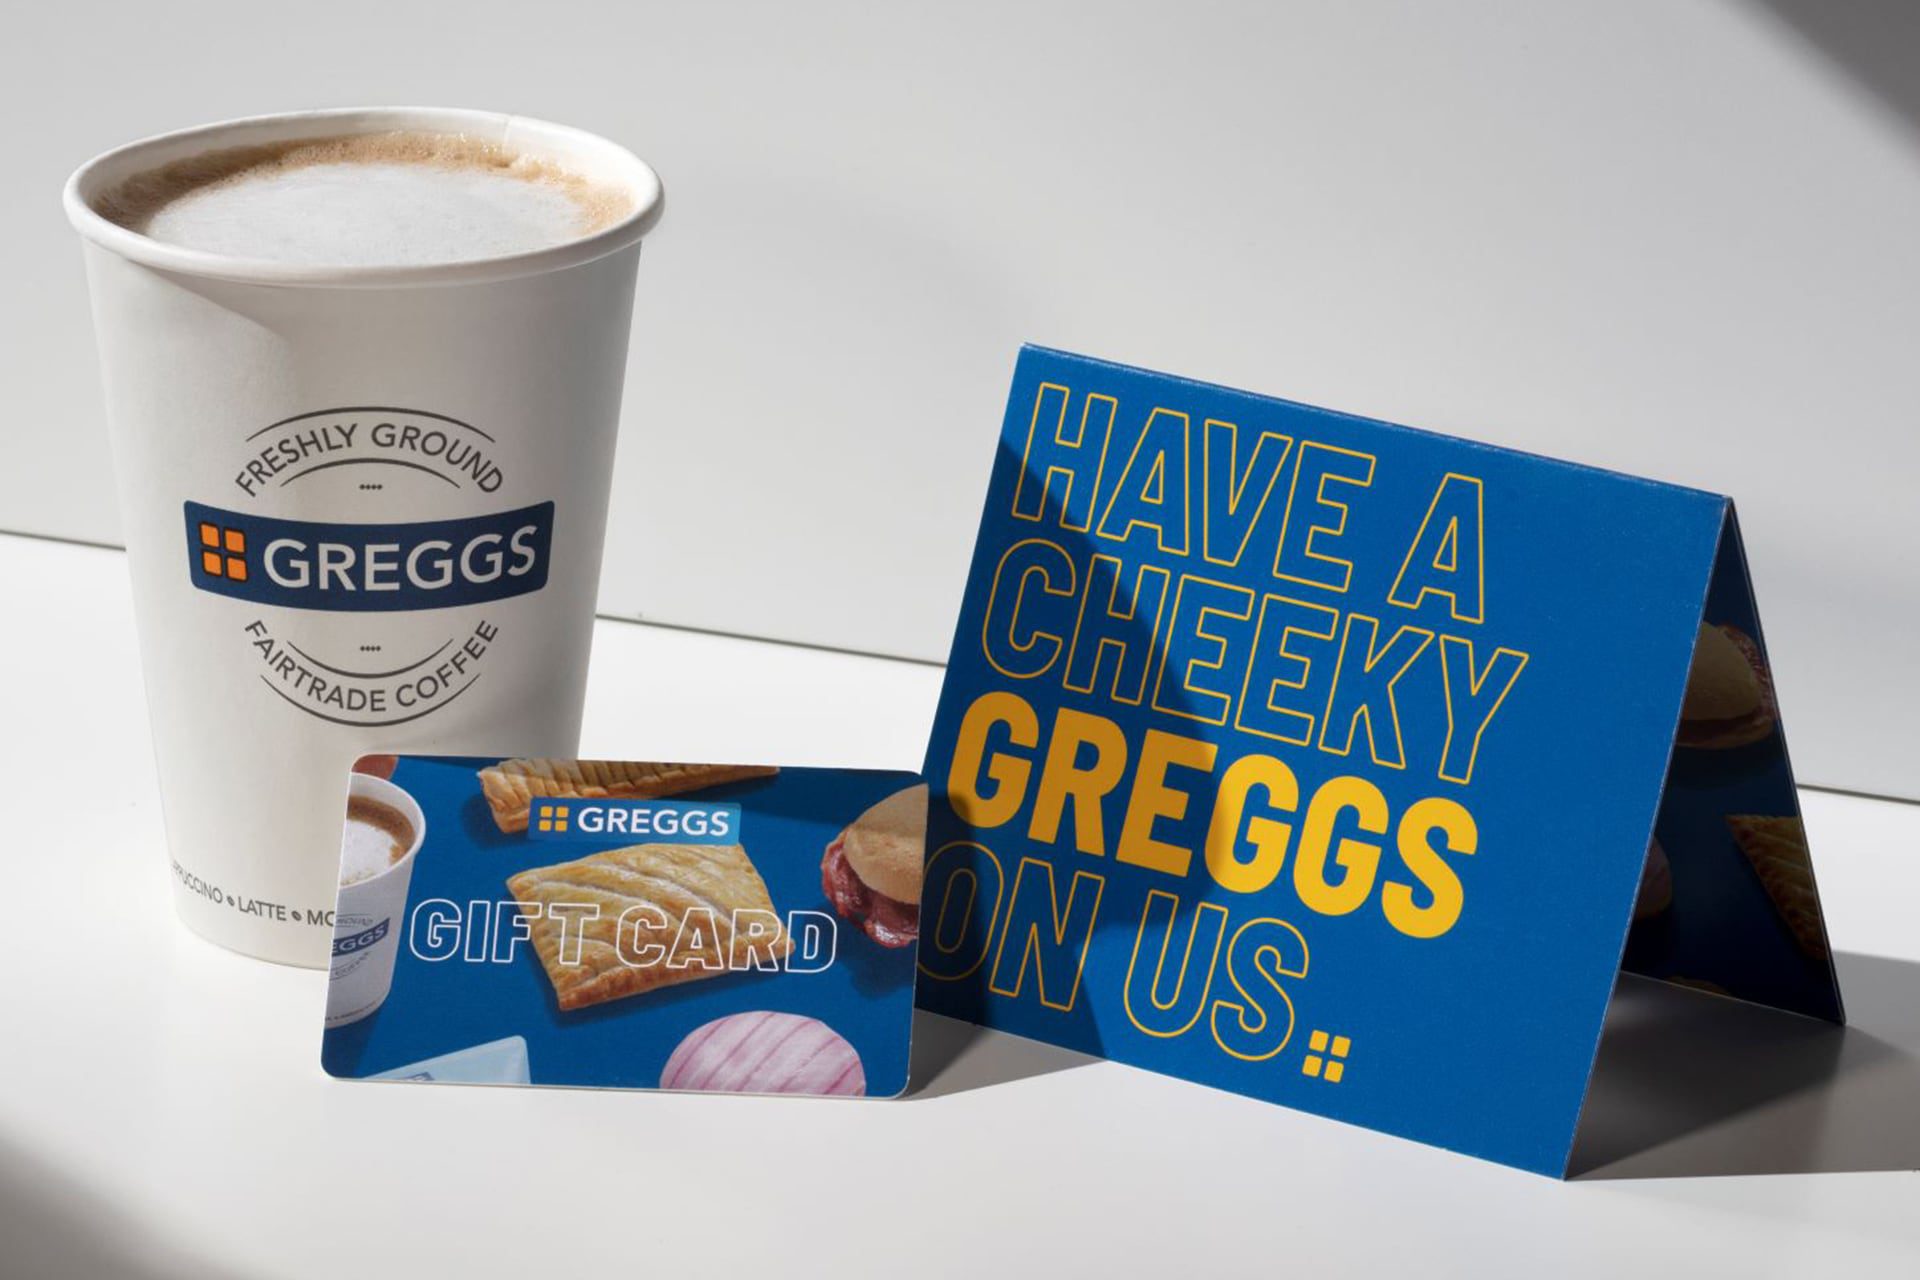 image of greggs gift card and coffee